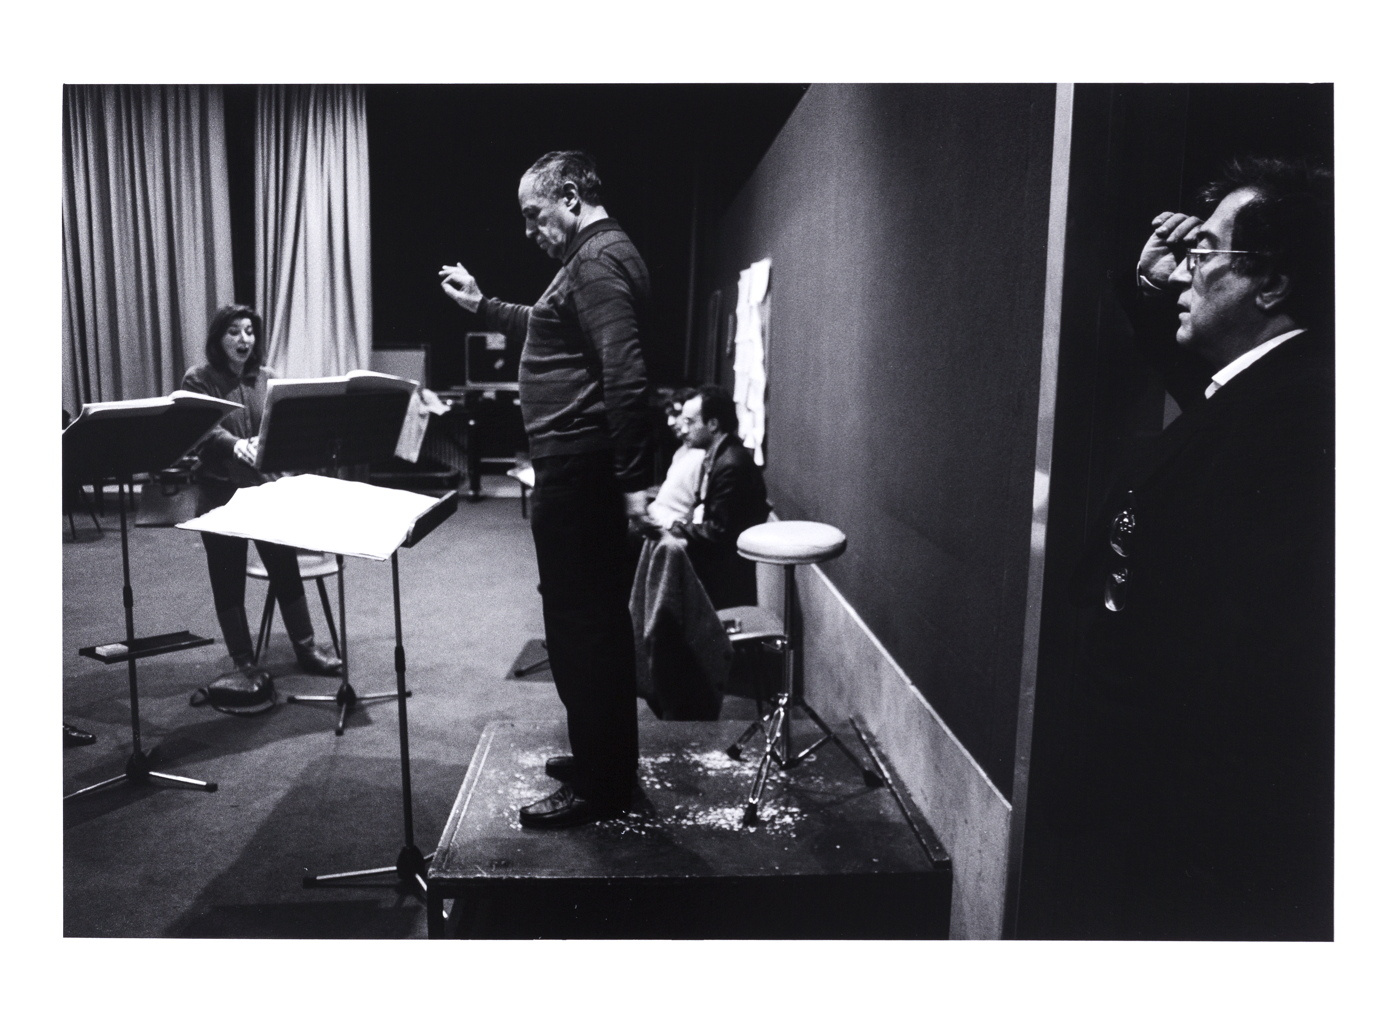 Werk - Luciano Berio listening to his piece conducted by Pierre Boulez during rehearsal in Paris - ZKM000160273.jpg